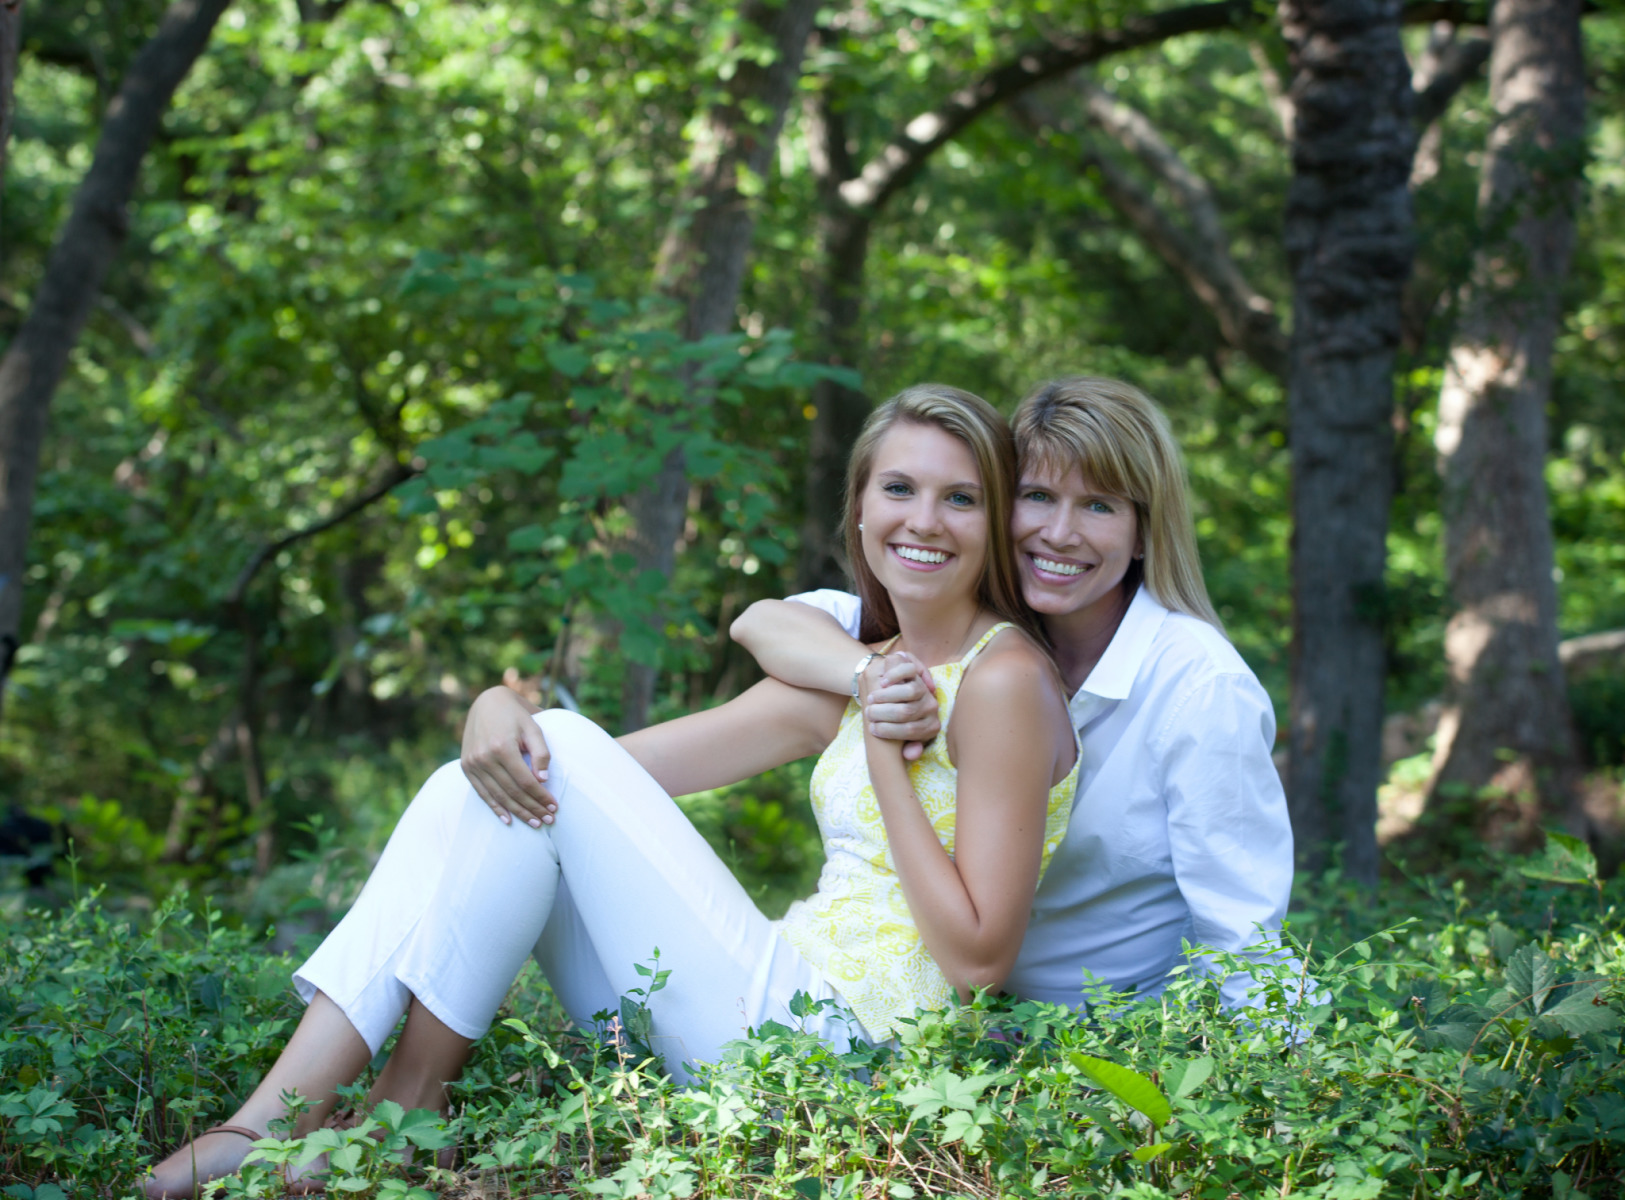 Mothers And Daughters Dallas Portrait Photographer Candice